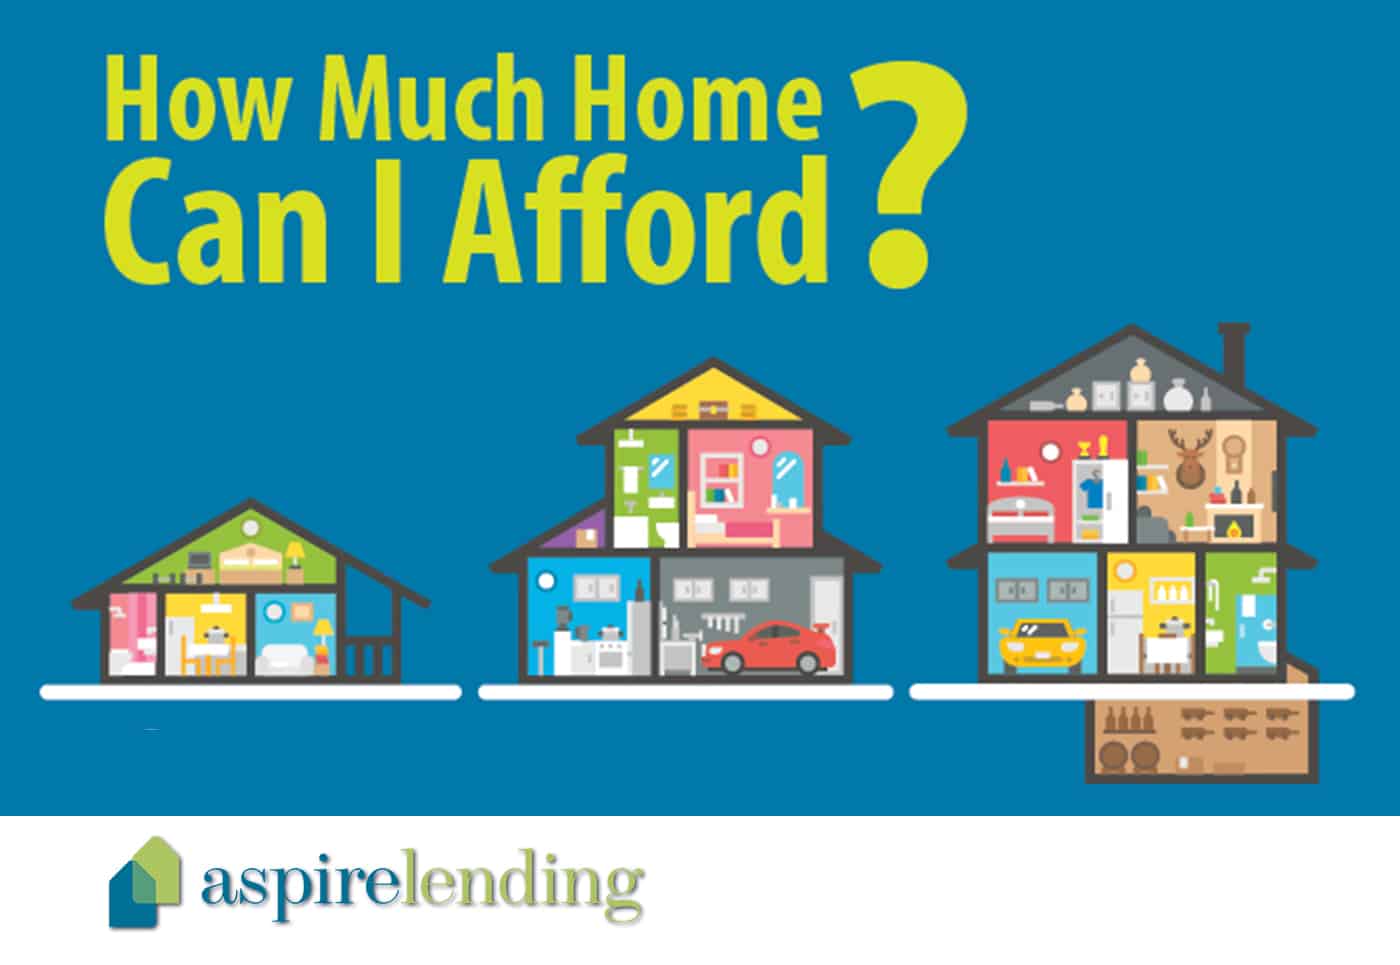 How Much Home Can I Afford? | Aspire